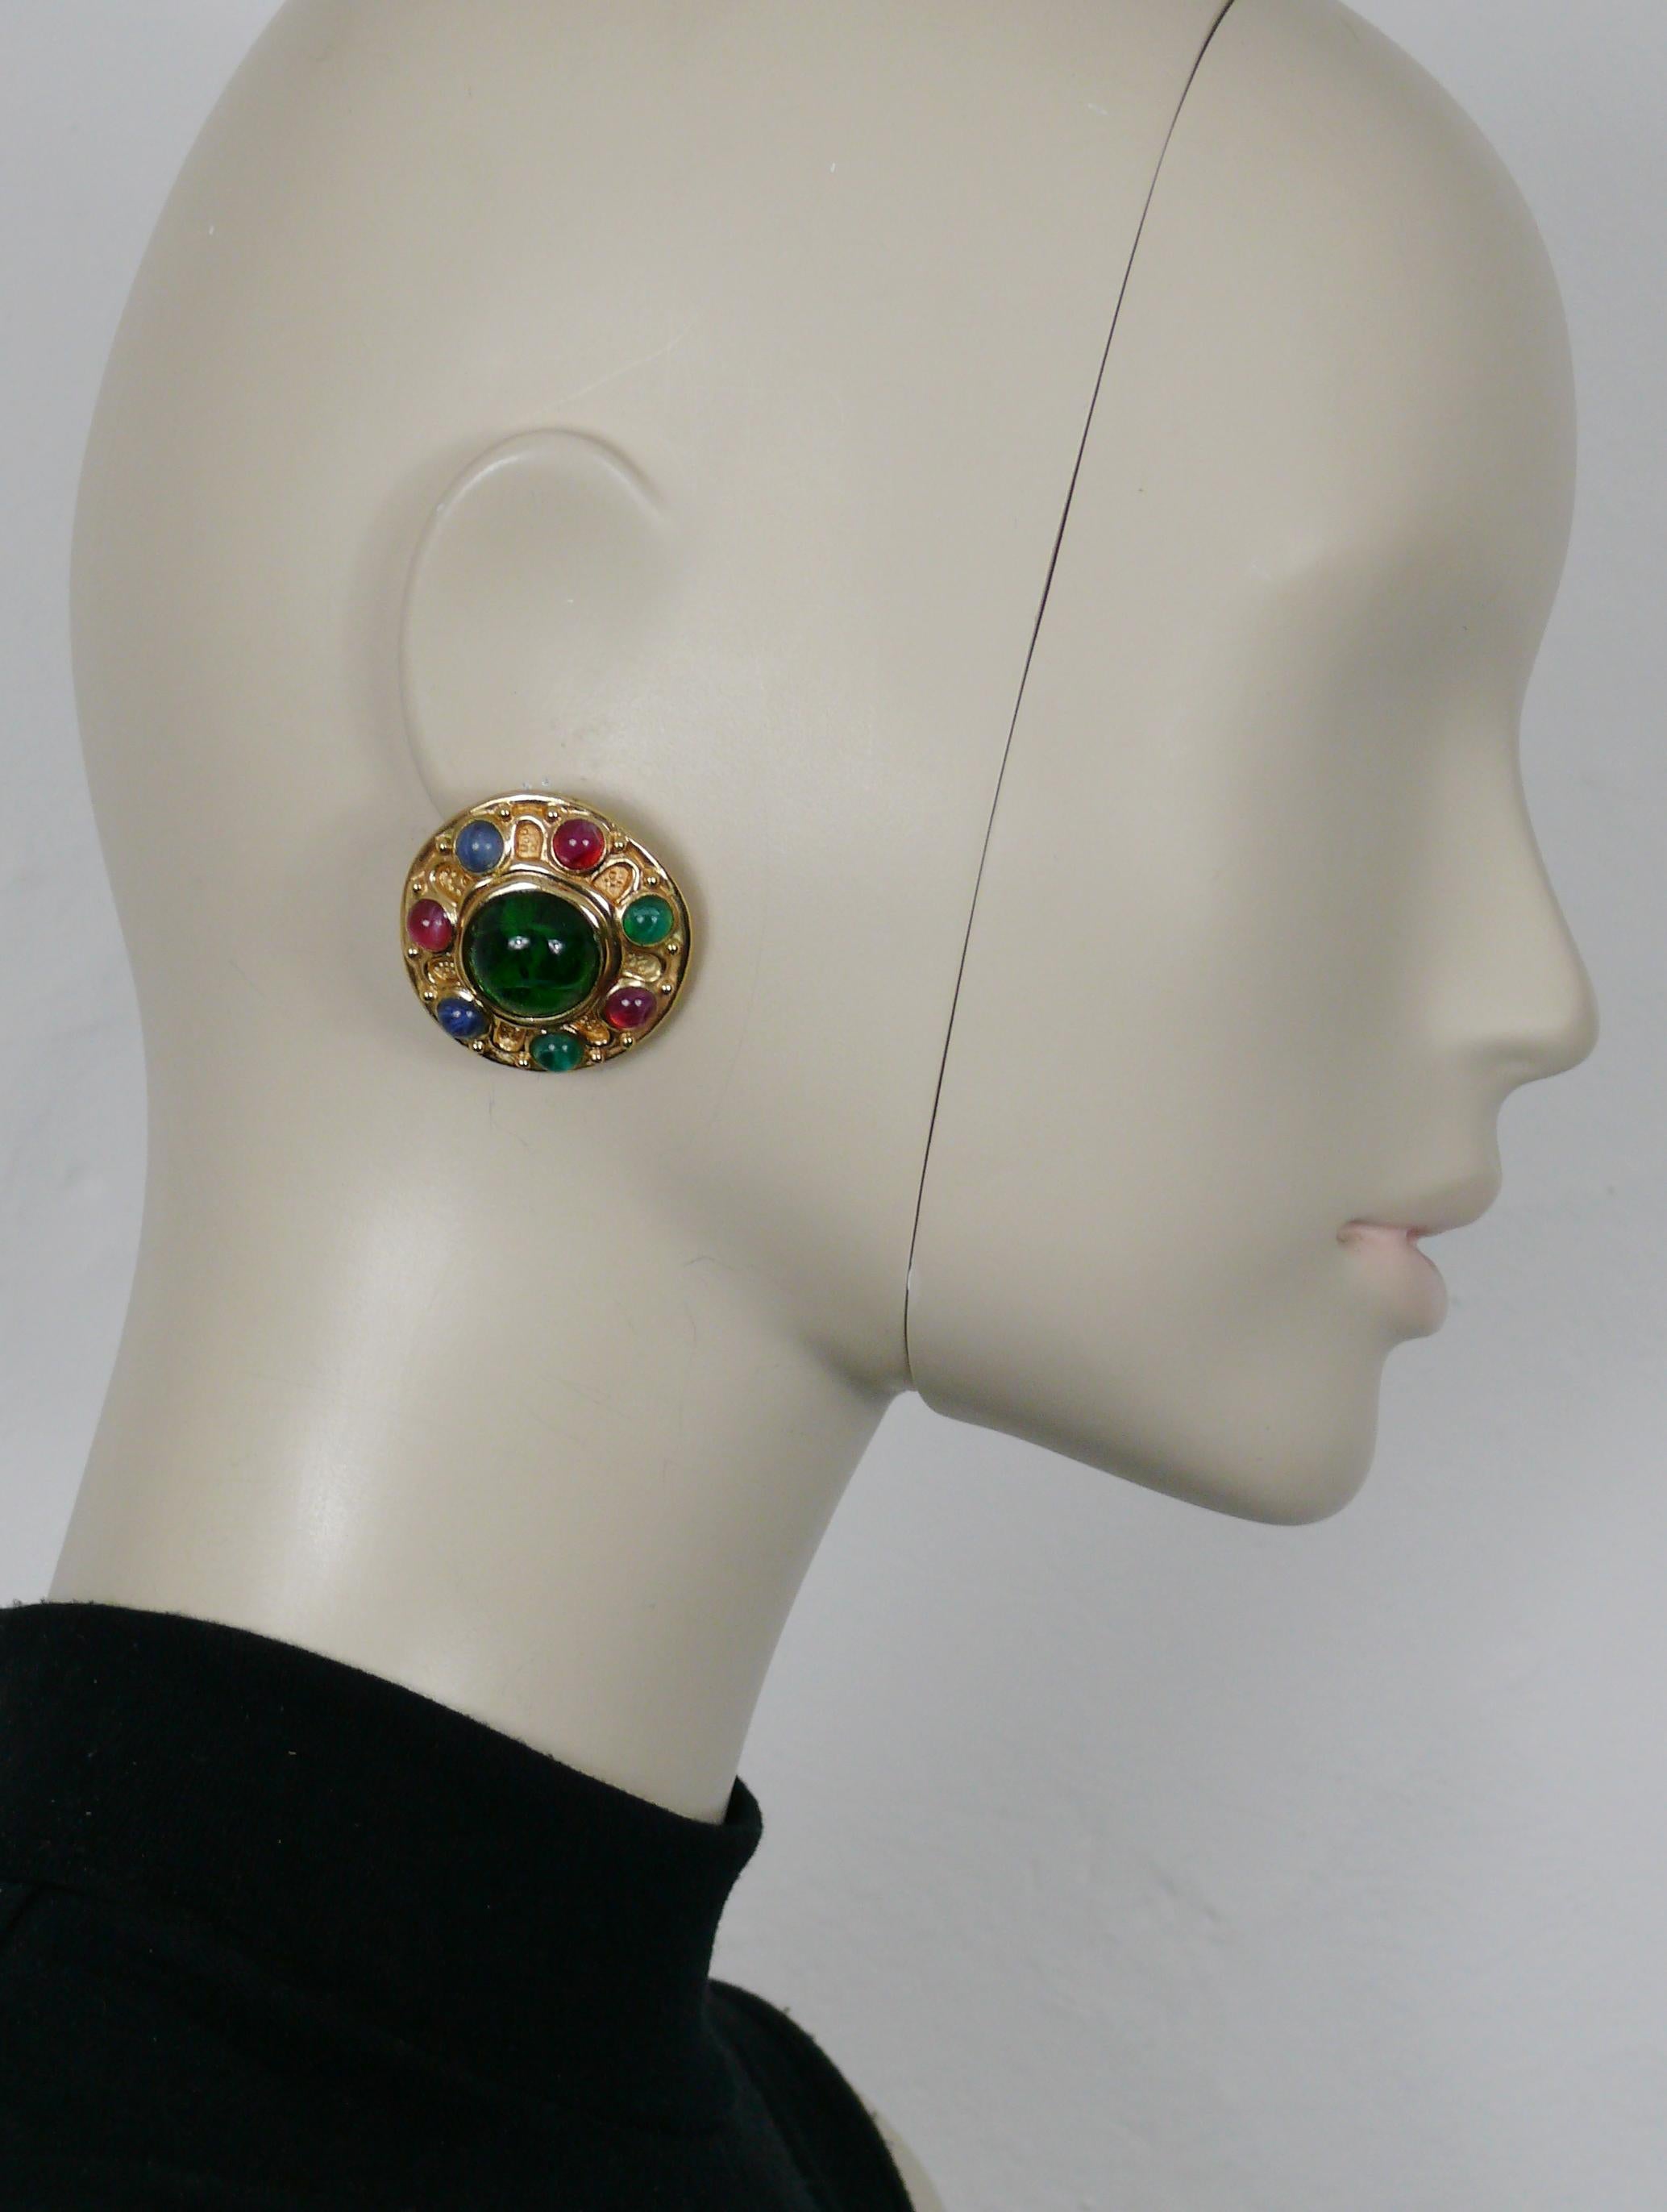 CHRISTIAN DIOR vintage gold tone clip-on earrings embelisshed with multicolour (green, red and blue) marbled glass cabochons.

Embossed CHR. DIOR © GERMANY.

Indicative measurements : diameter approx. 3.5 cm (1.38 inches).

Weight per earrings :